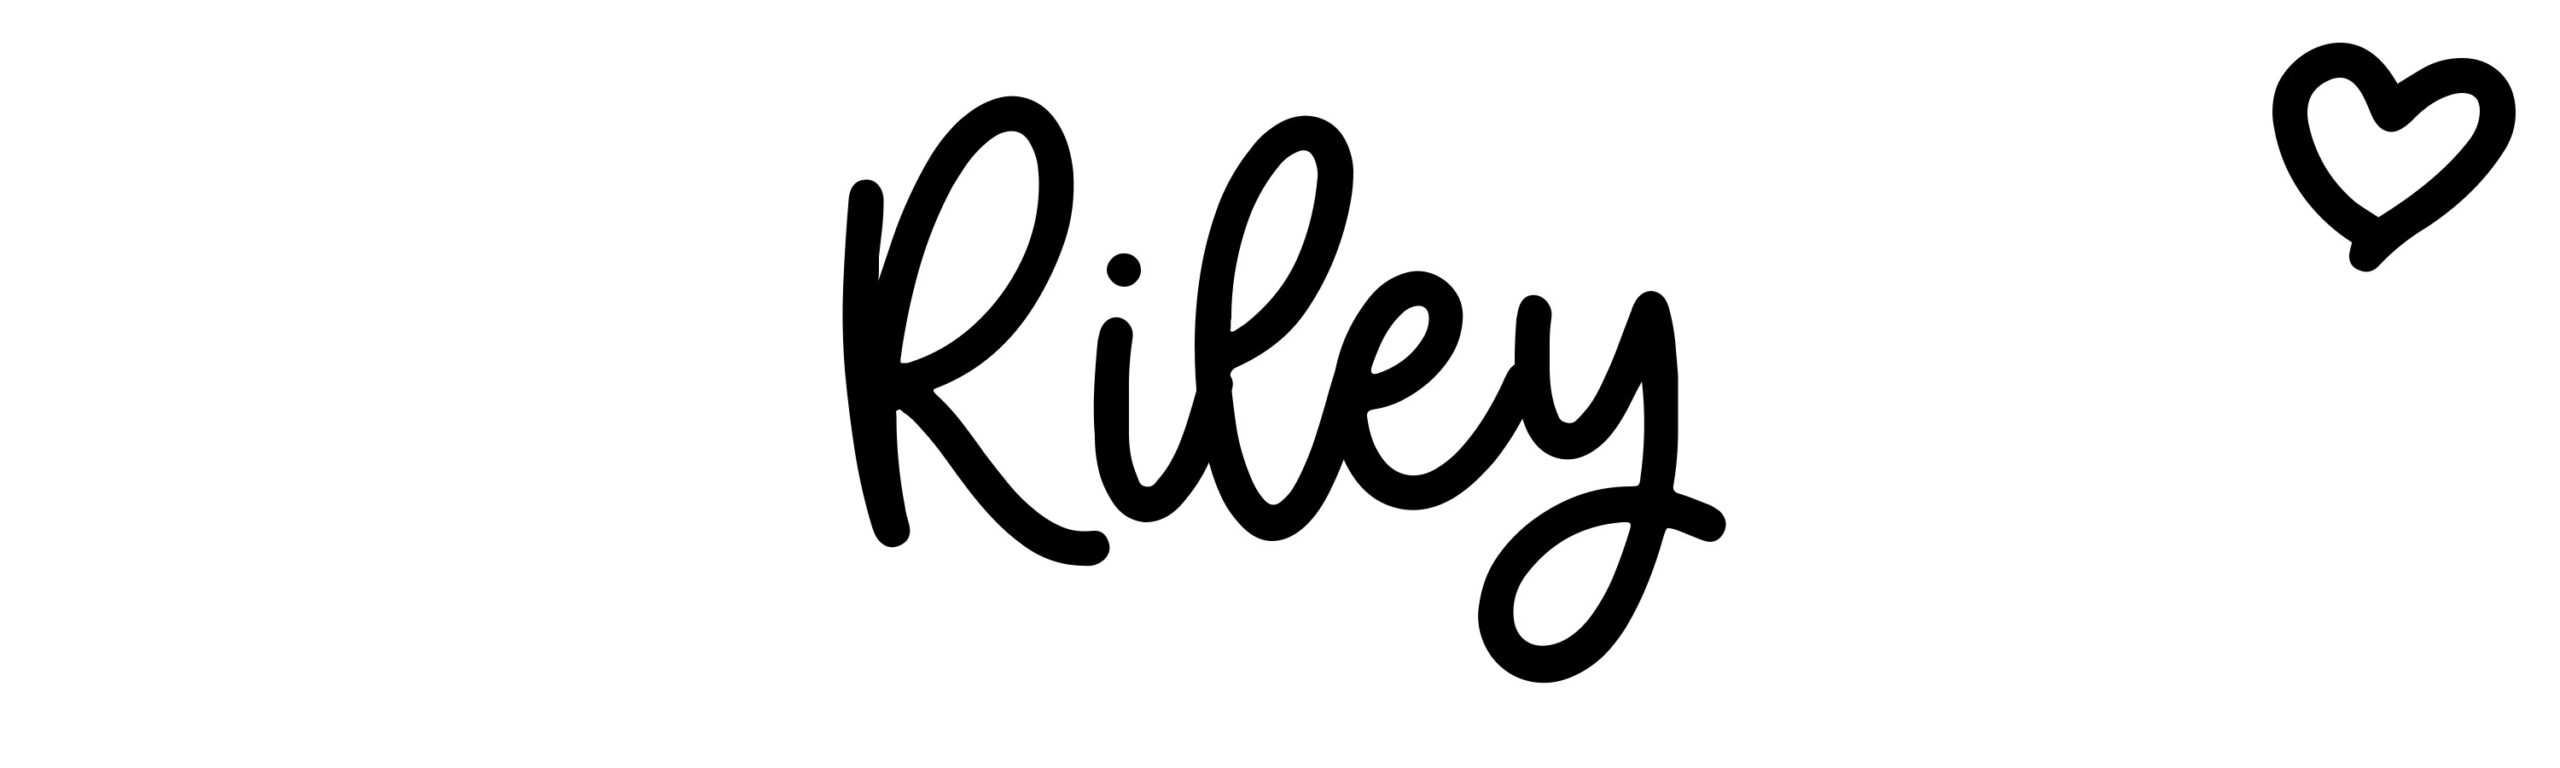 Riley - Name meaning, origin, variations and more